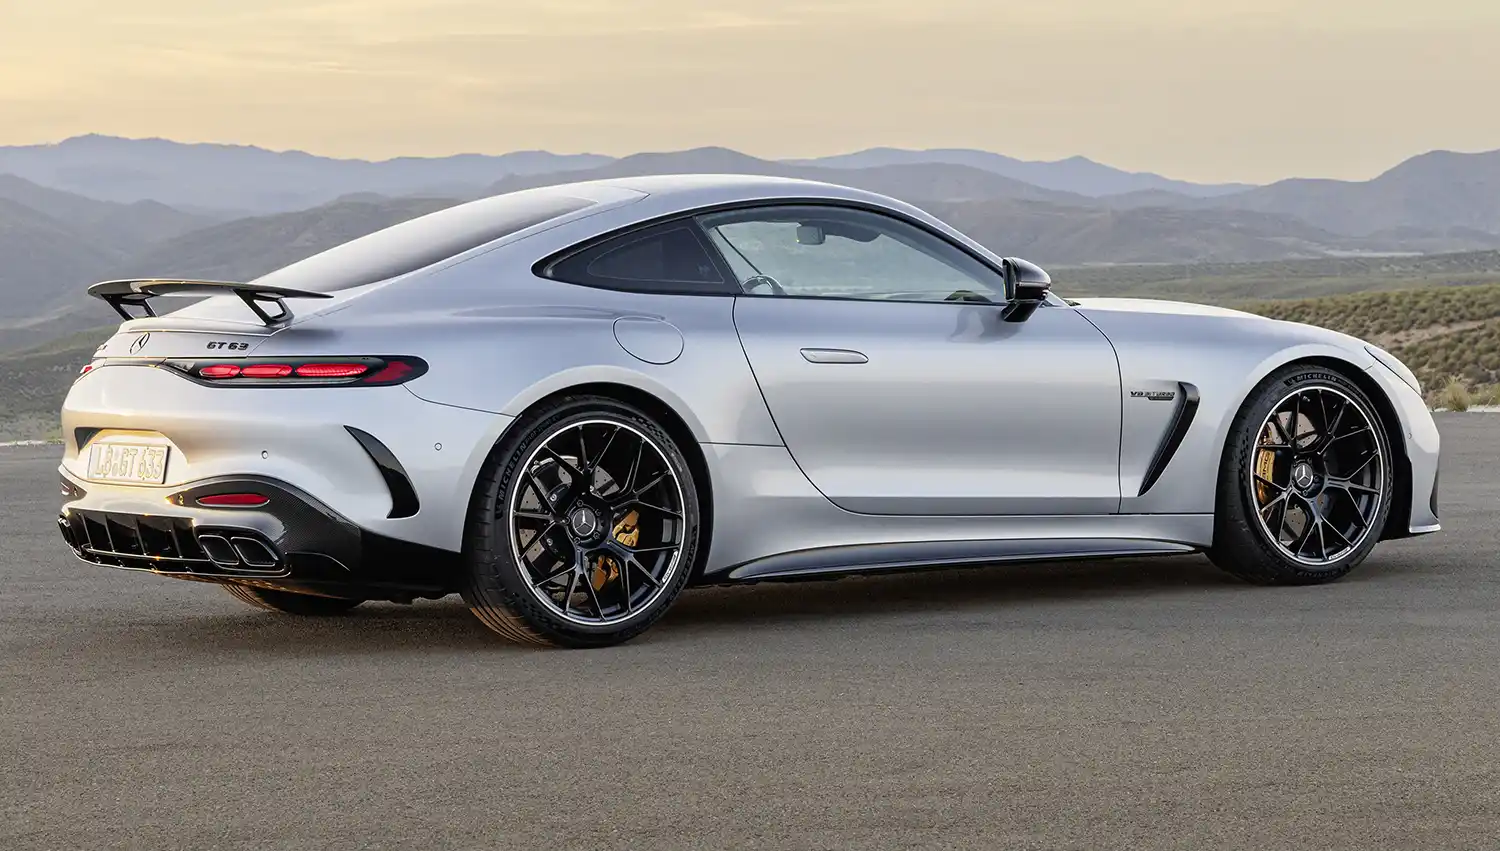 The all-new Mercedes-AMG GT